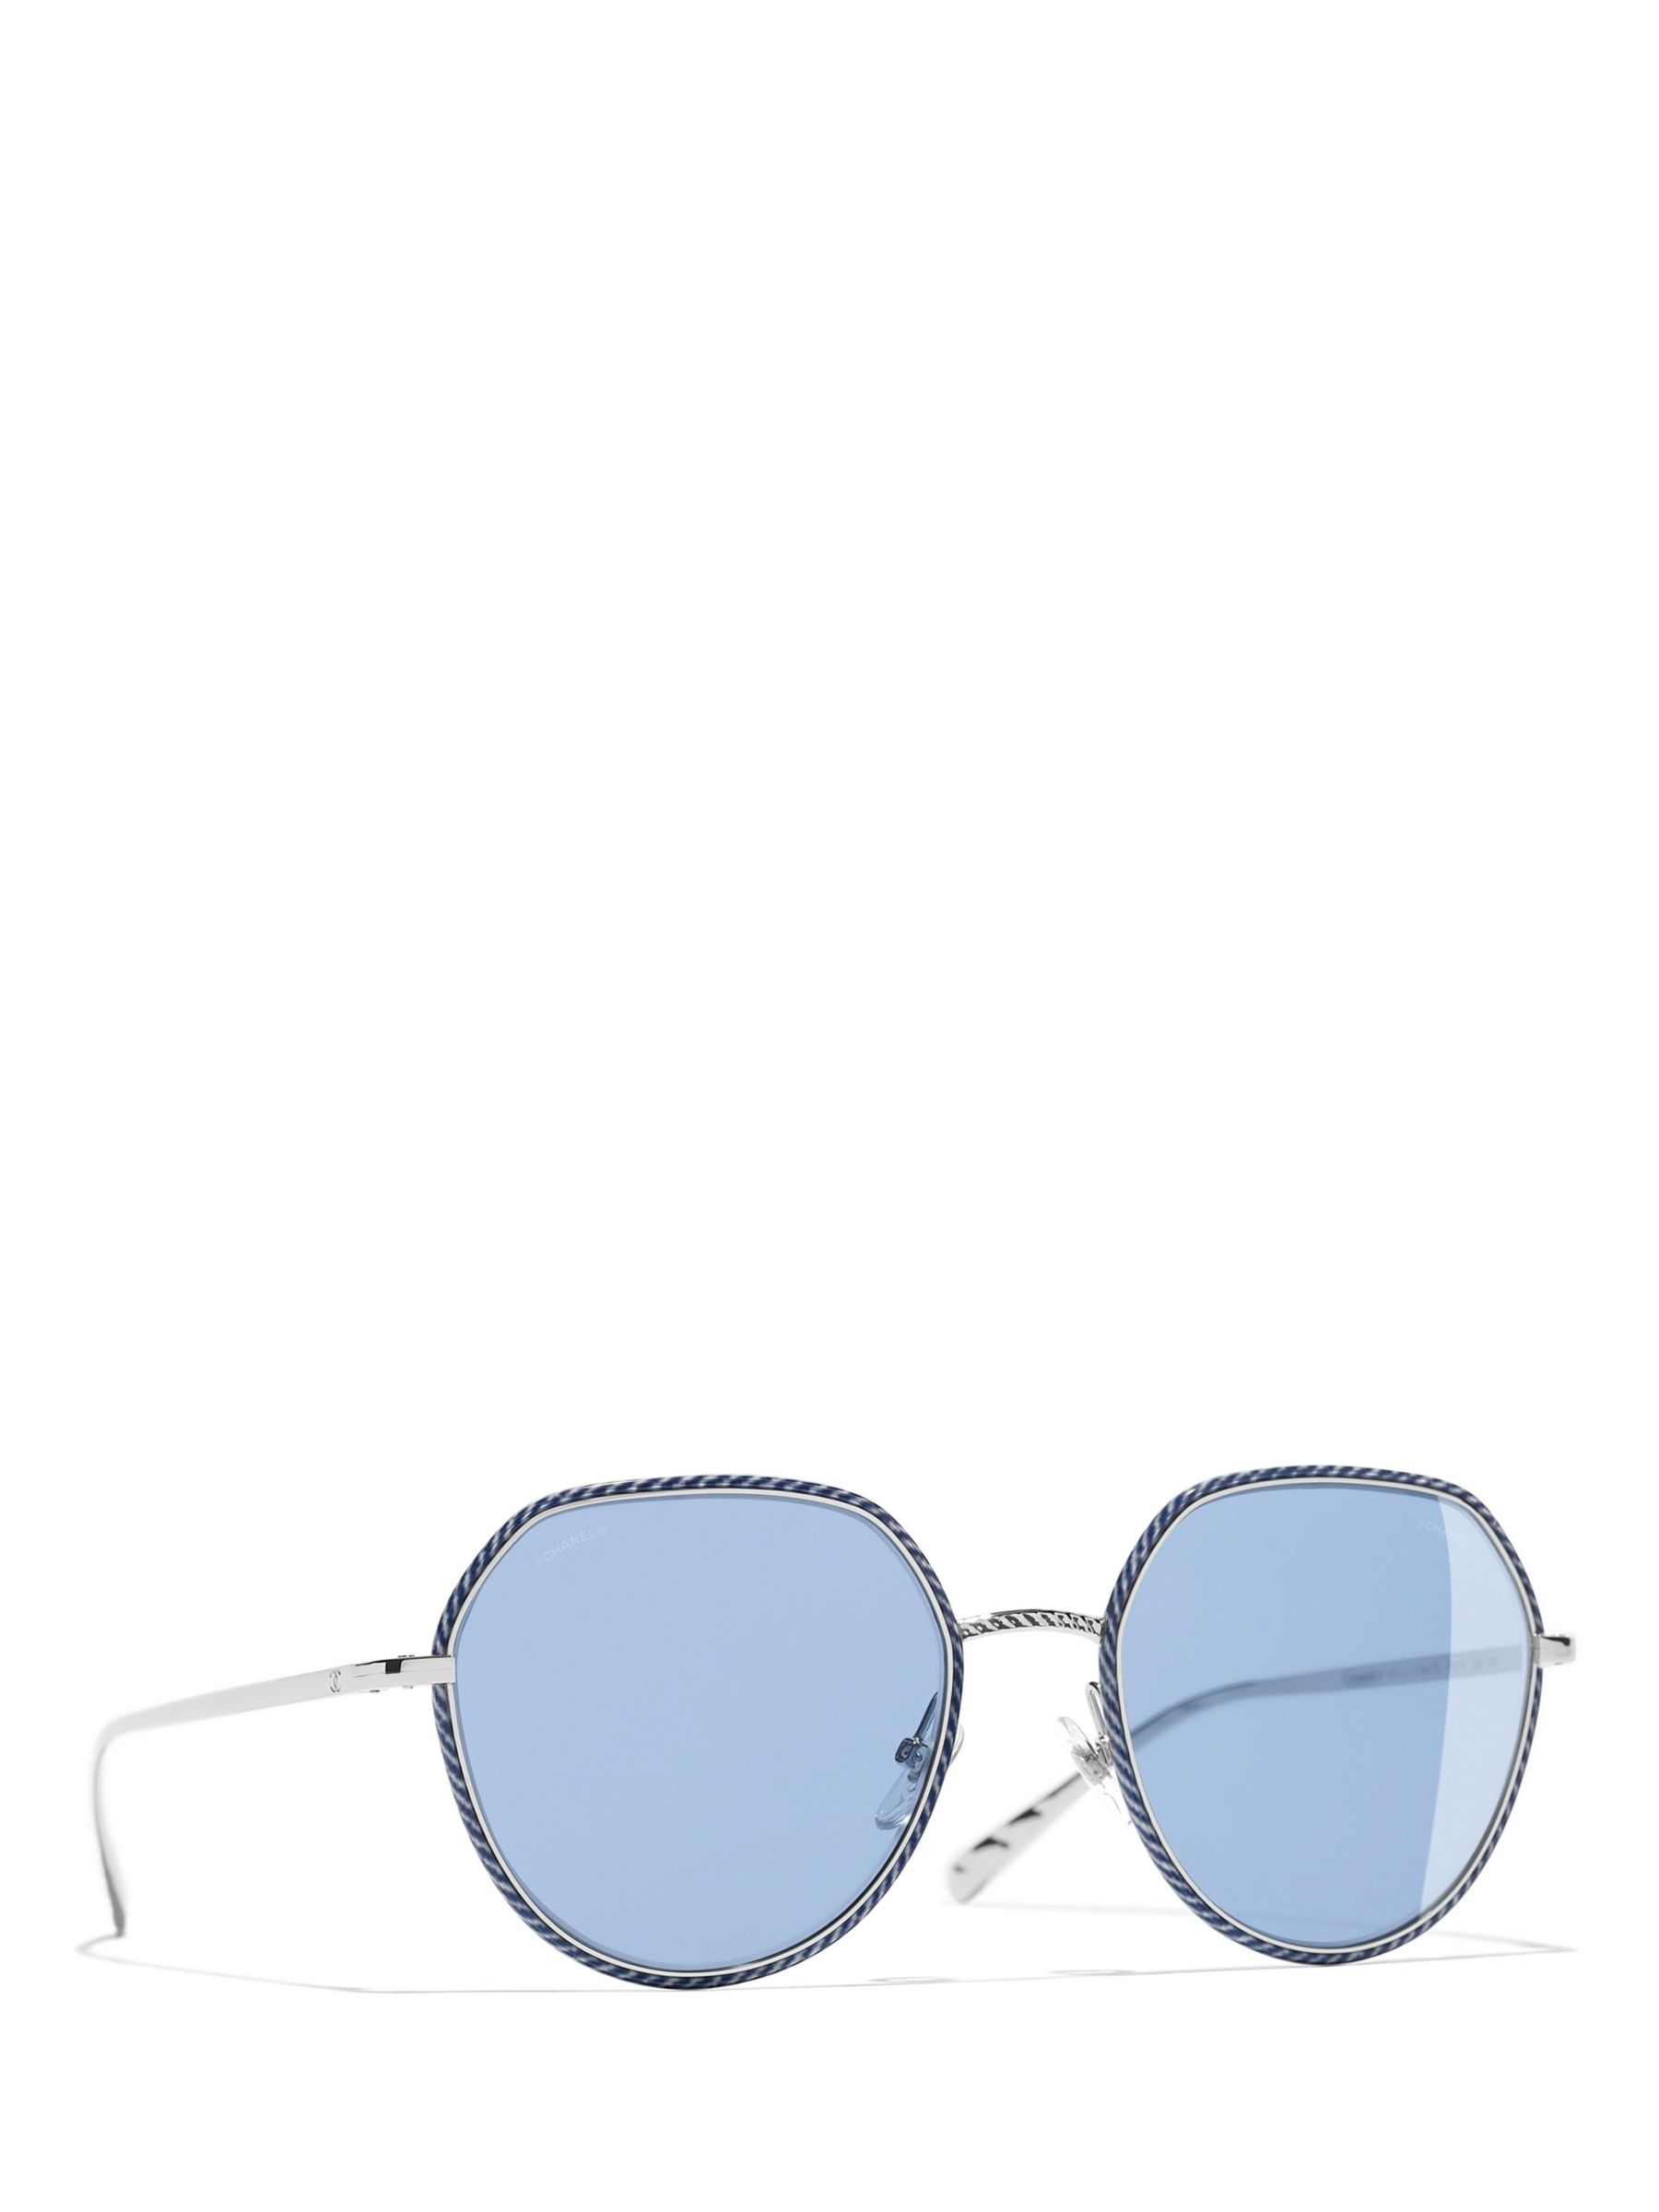 CHANEL Round Sunglasses CH4251J Silver/Blue at John Lewis & Partners